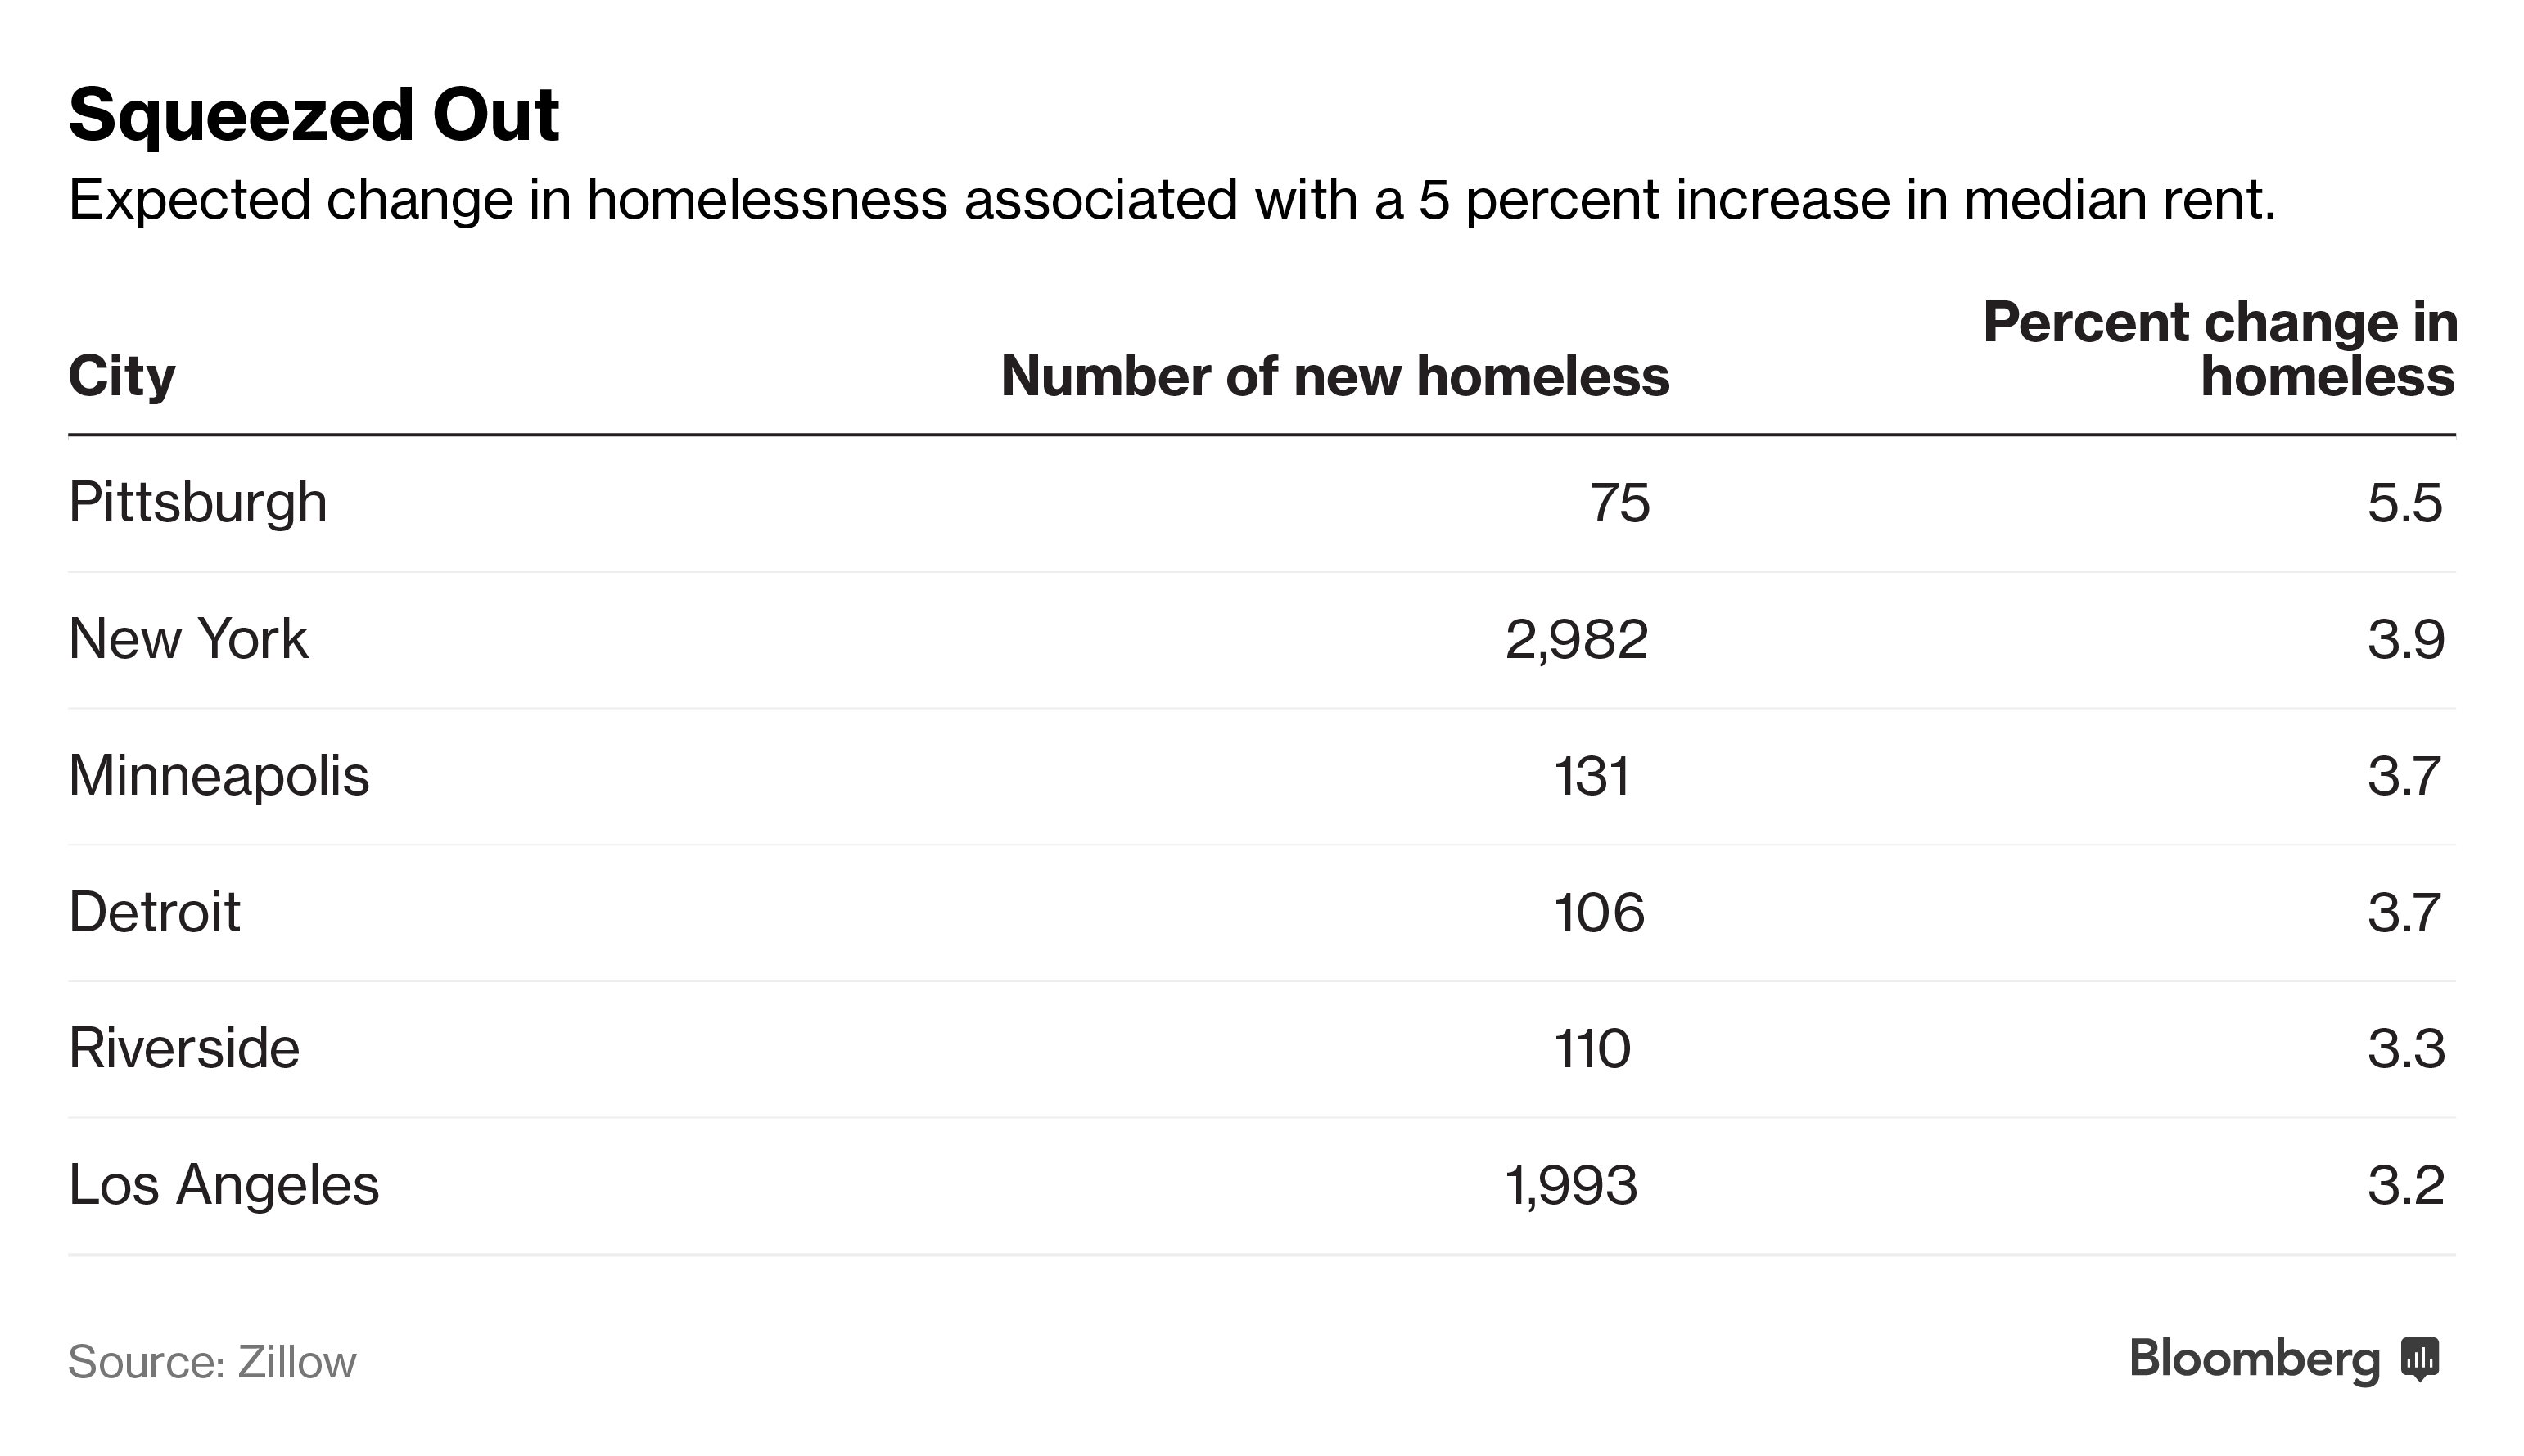 The Cities Where Rent Hikes Leave the Most People Homeless Bloomberg